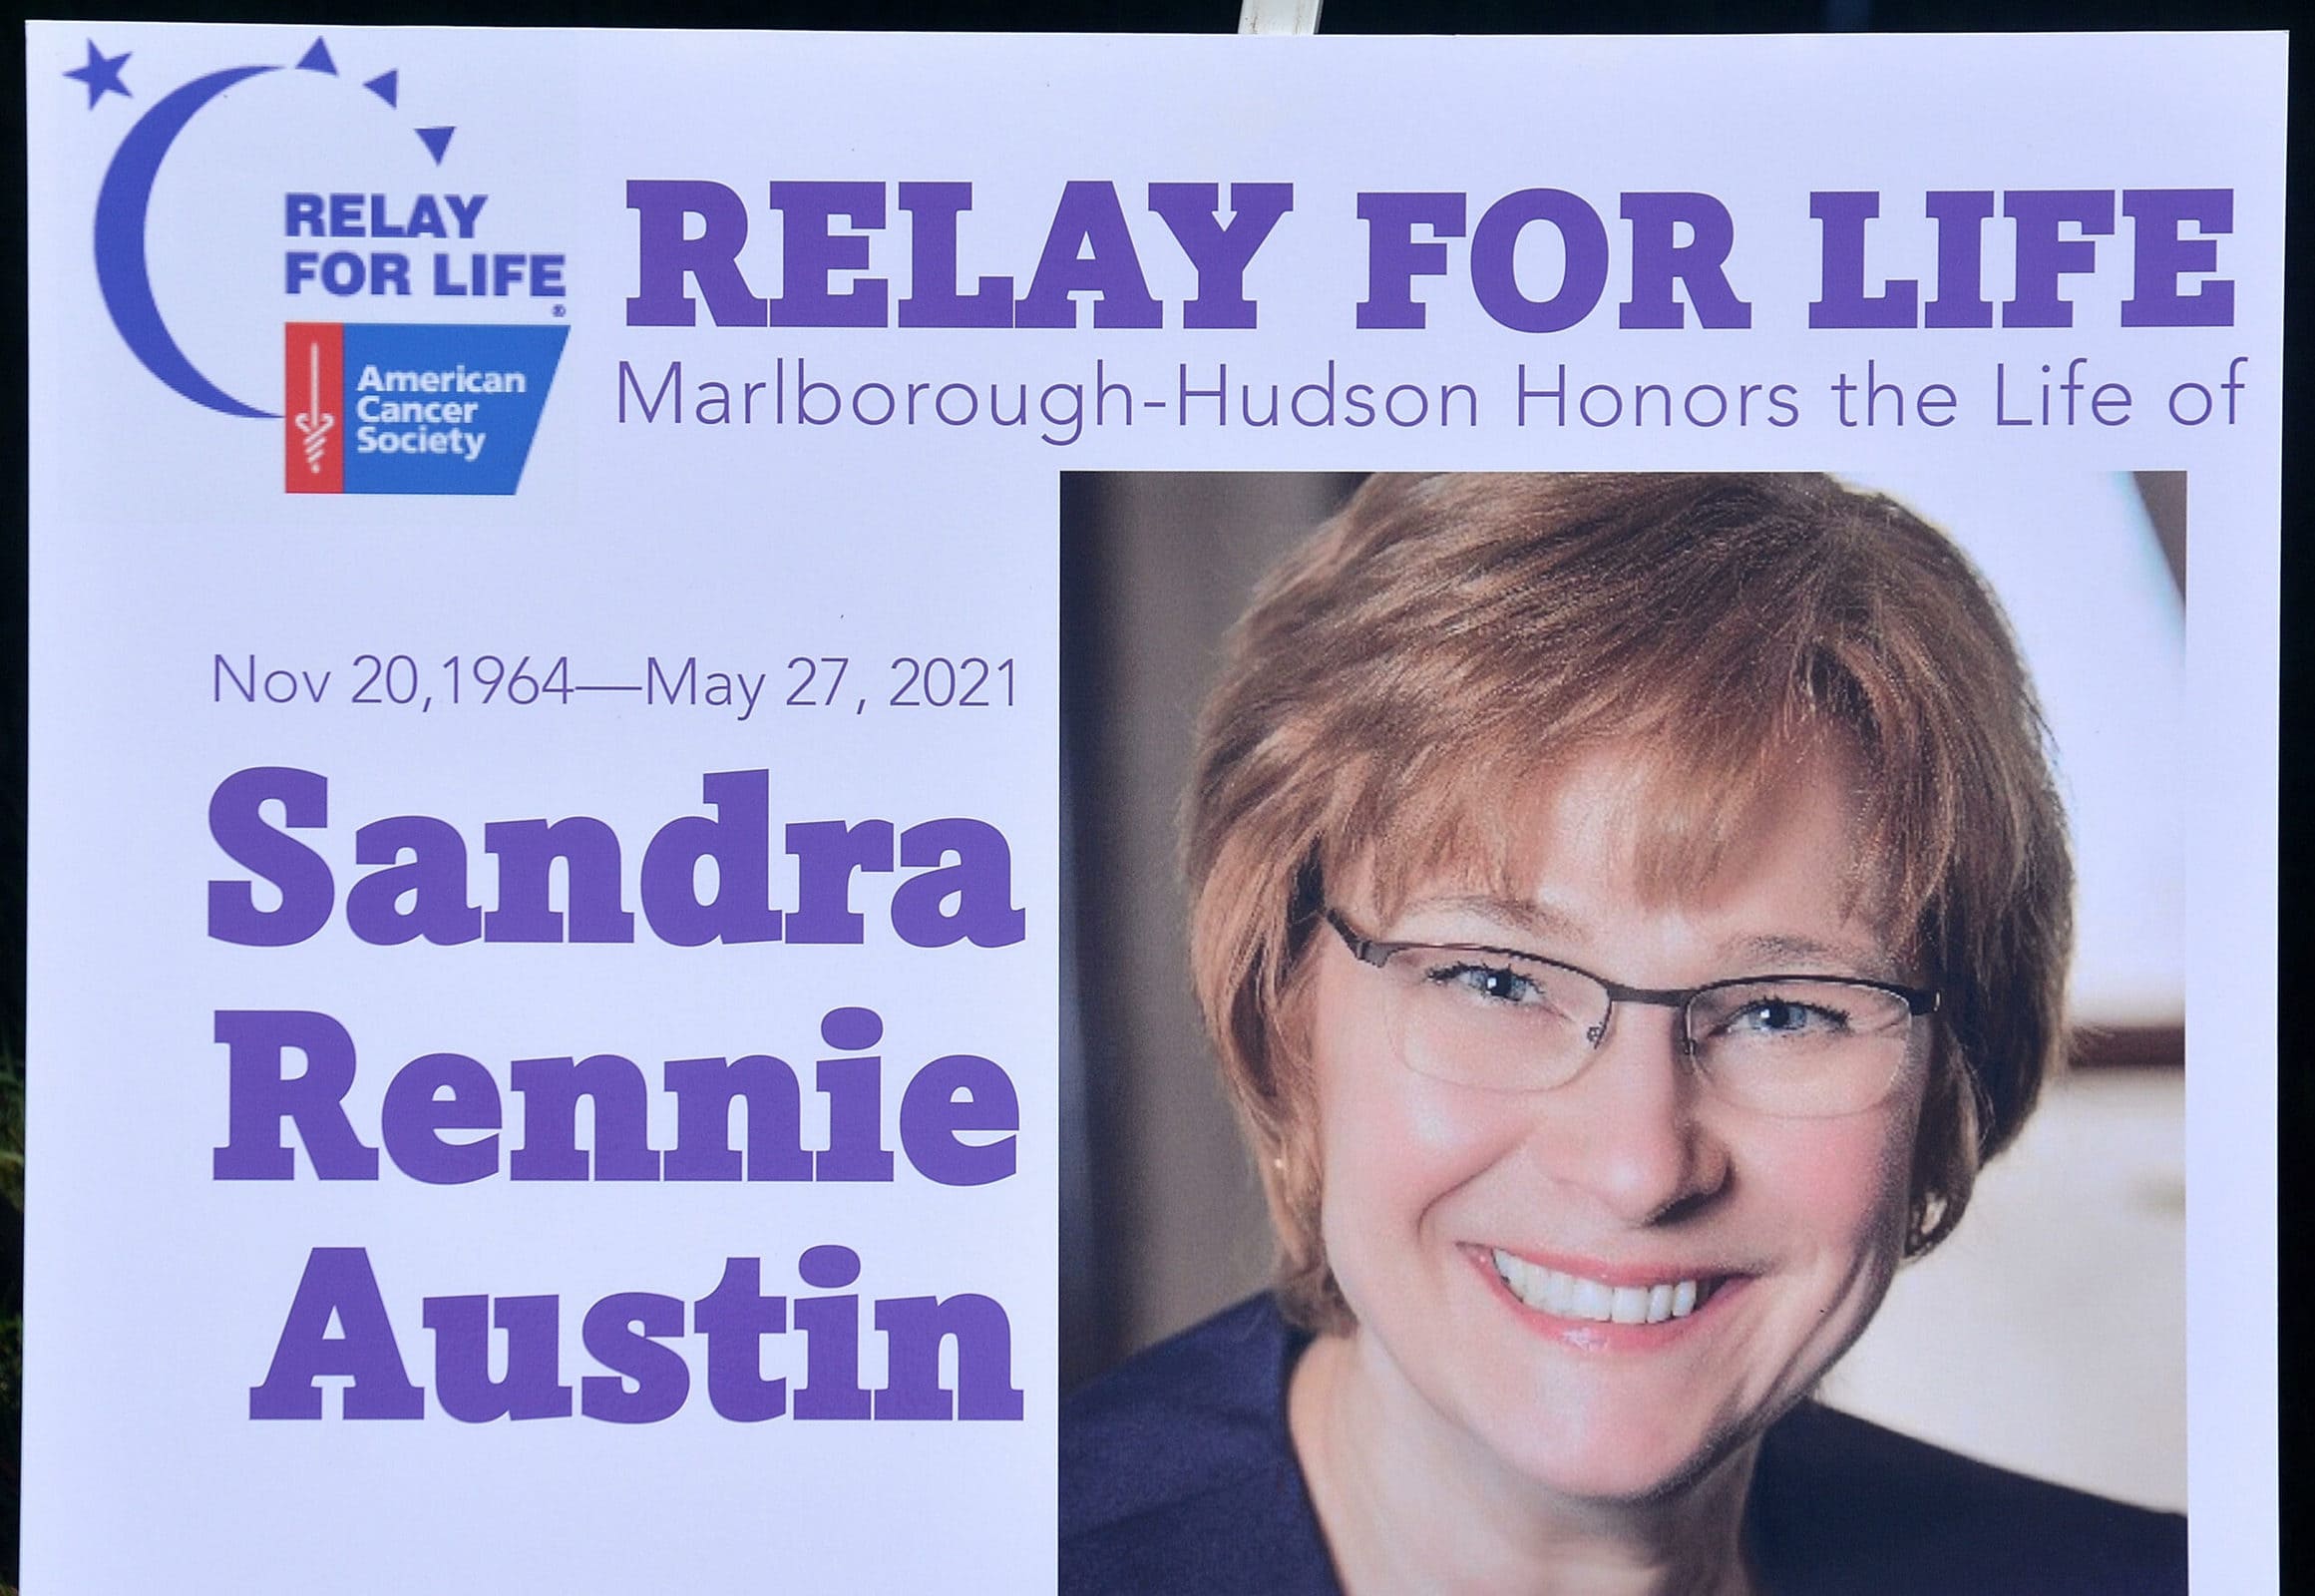 The life of Sandra Rennie Austin is honored with posters on the track at Ward Park.